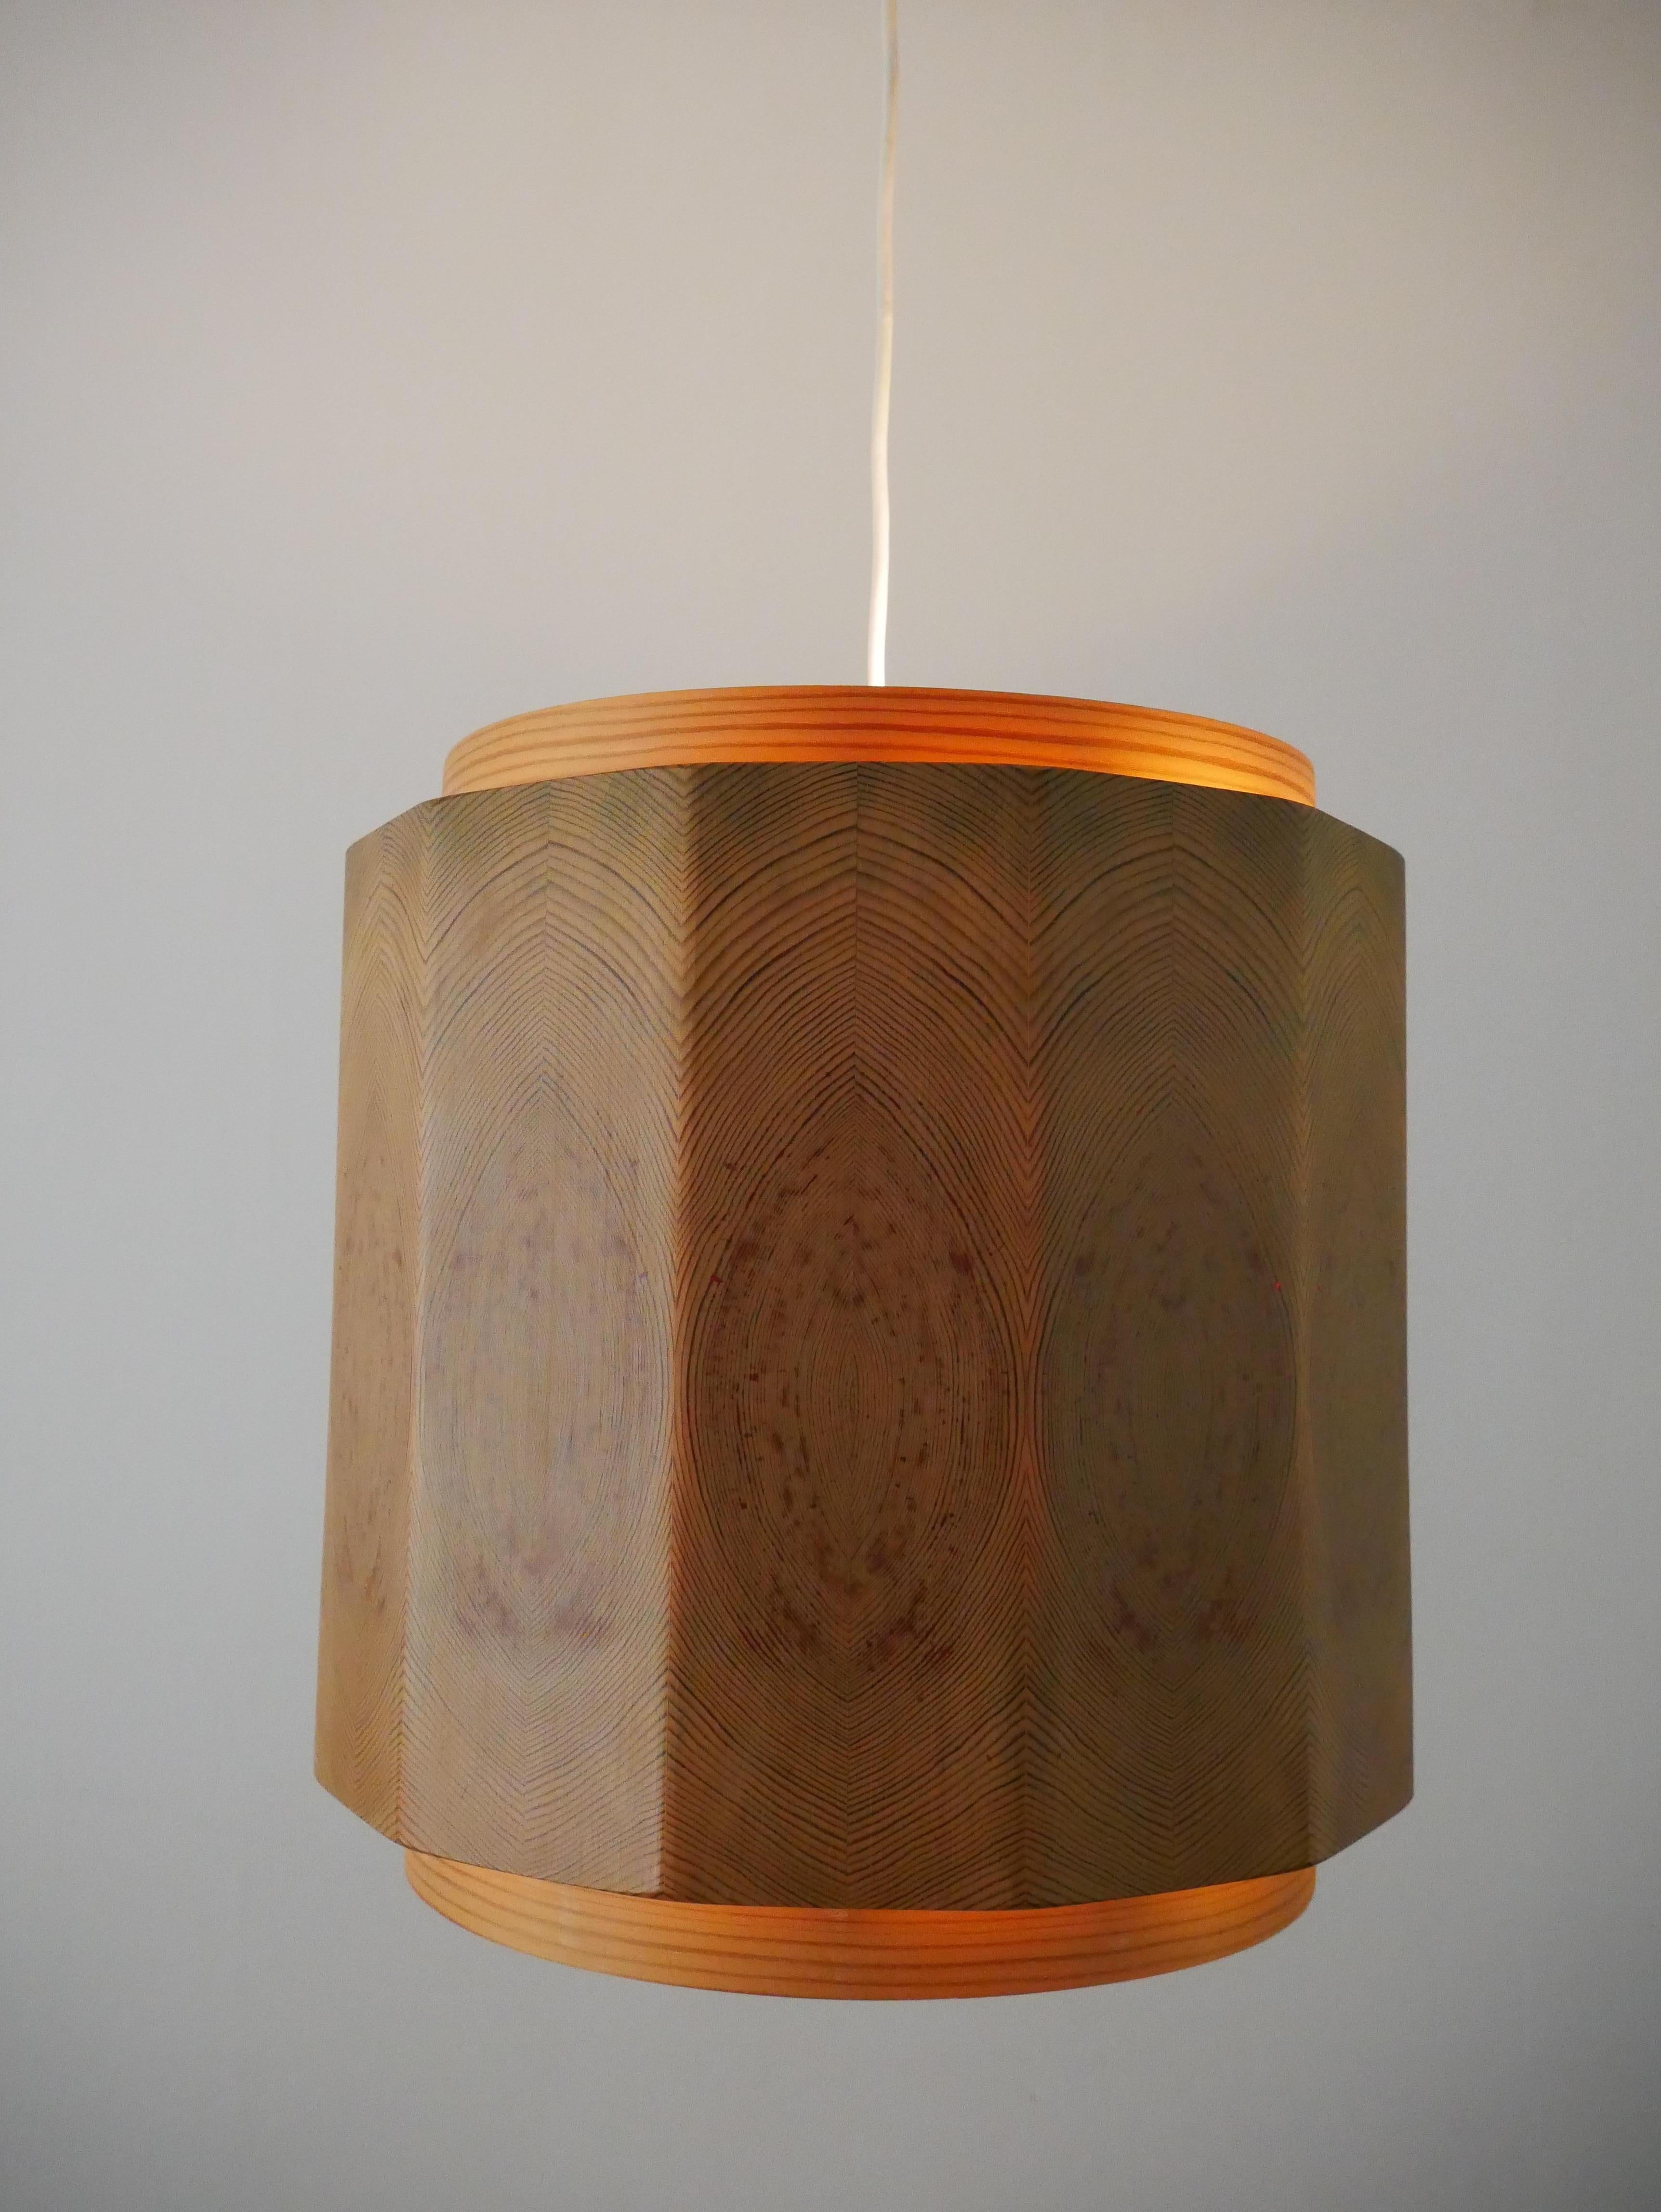 Big pendent Lamp by Leif Wikner 

Made out of thin pine wood from the 1960. 
In perfect condition.

Height: 48,5 cm
Diameter: 21 cm
